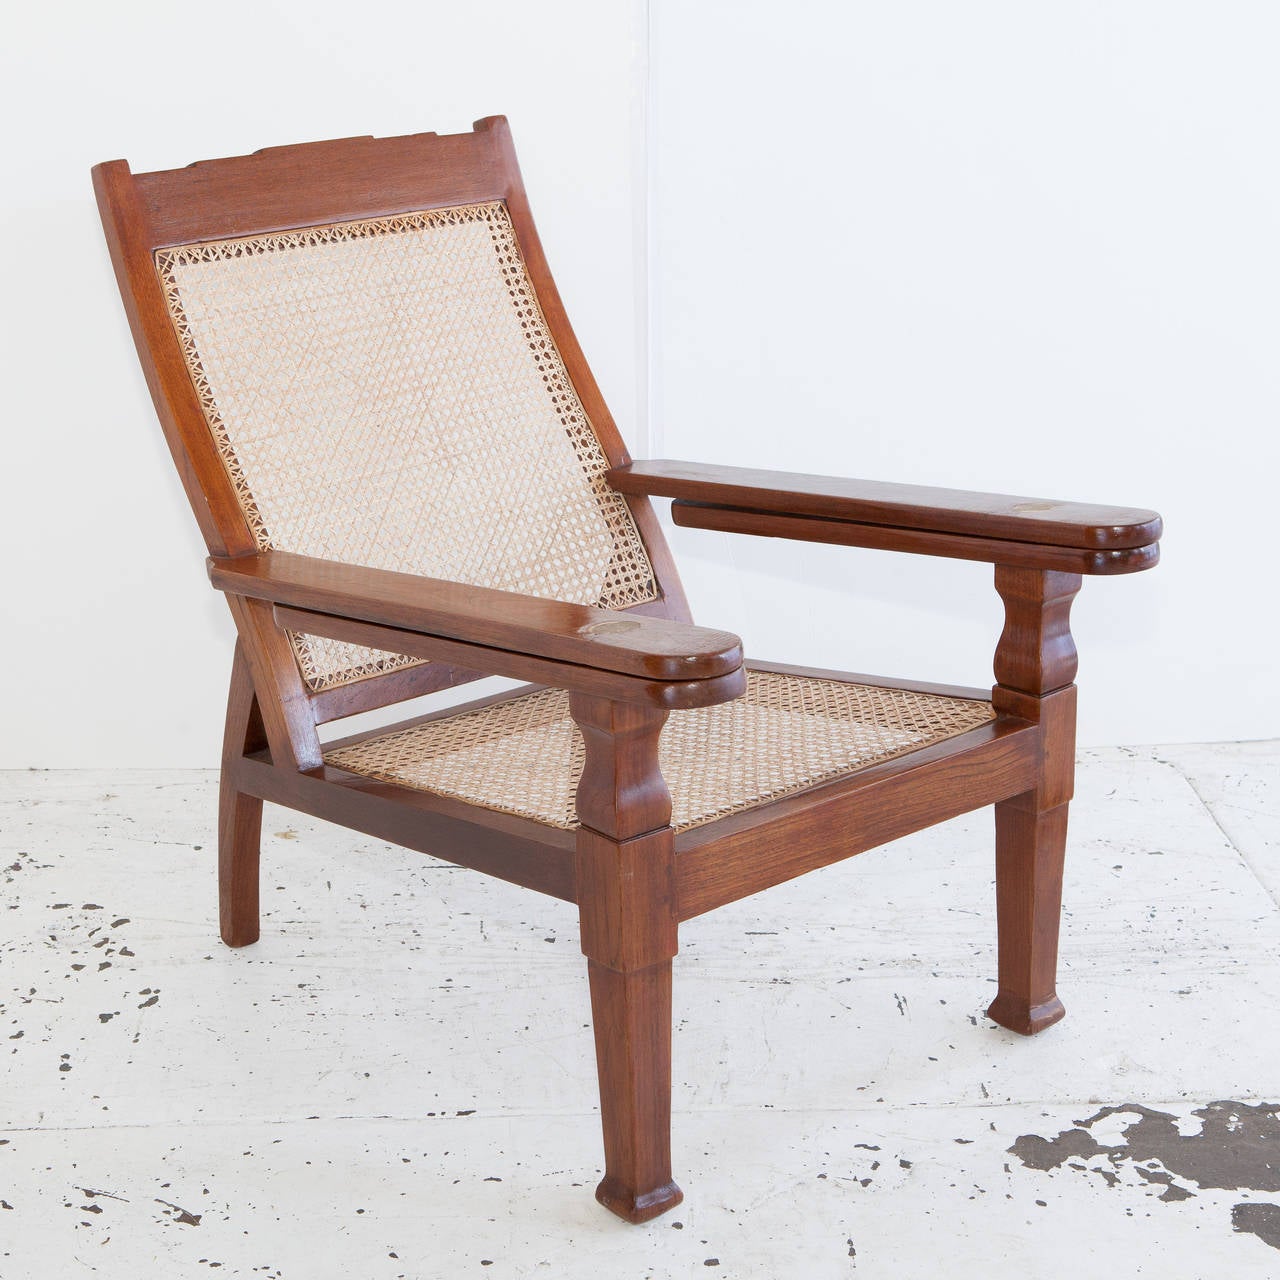 Teak plantation chair from India with folding arms and newly caned seat.